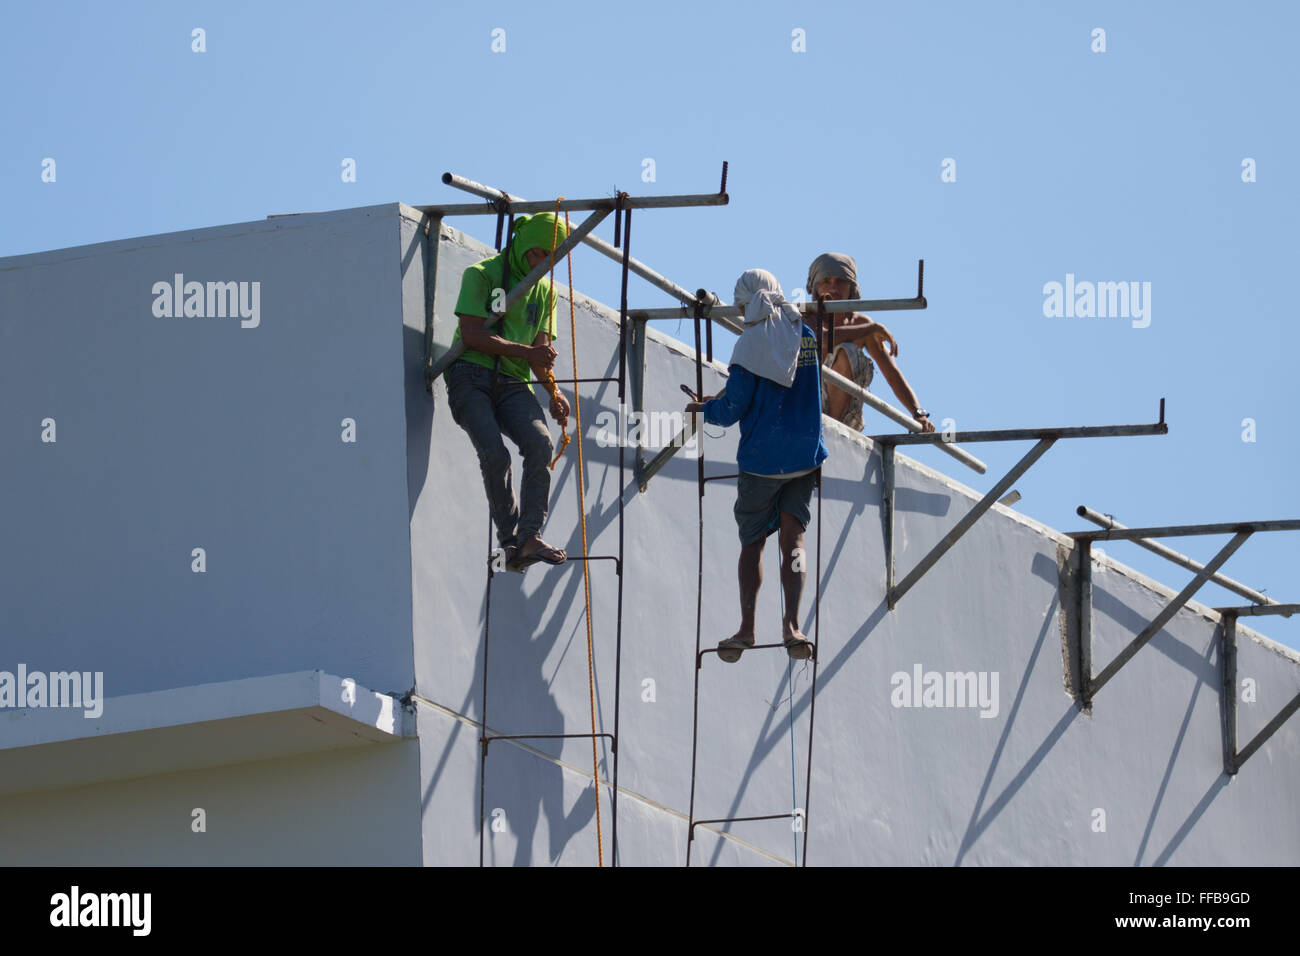 A common scene in the Philippine construction industry - building workers hang precariously from makeshift iron welded ladders. Stock Photo